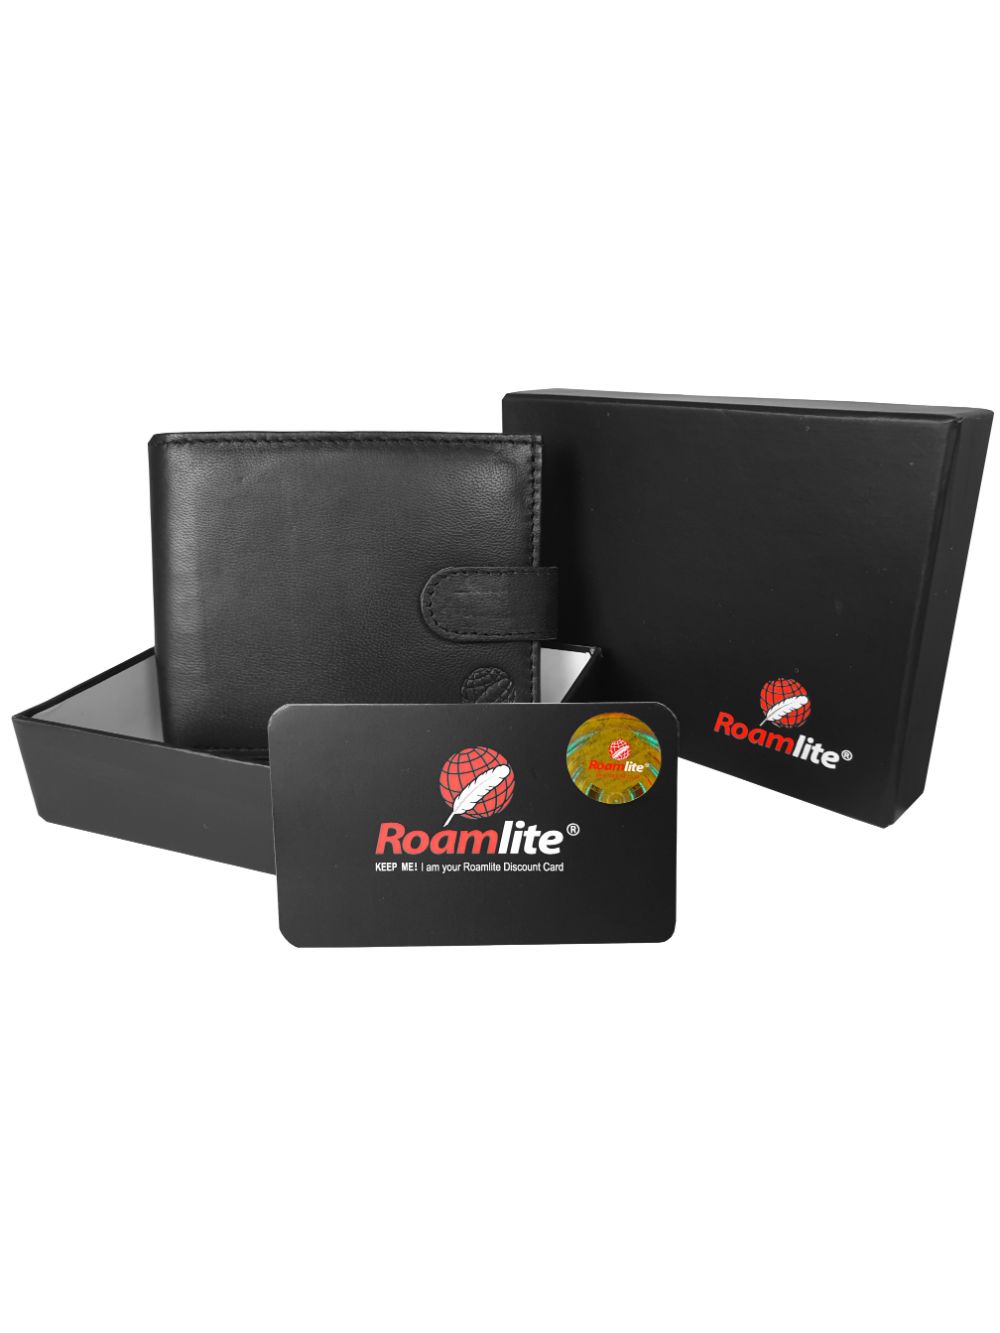  Roamlite Mens chained wallet black leather rl506 boxed